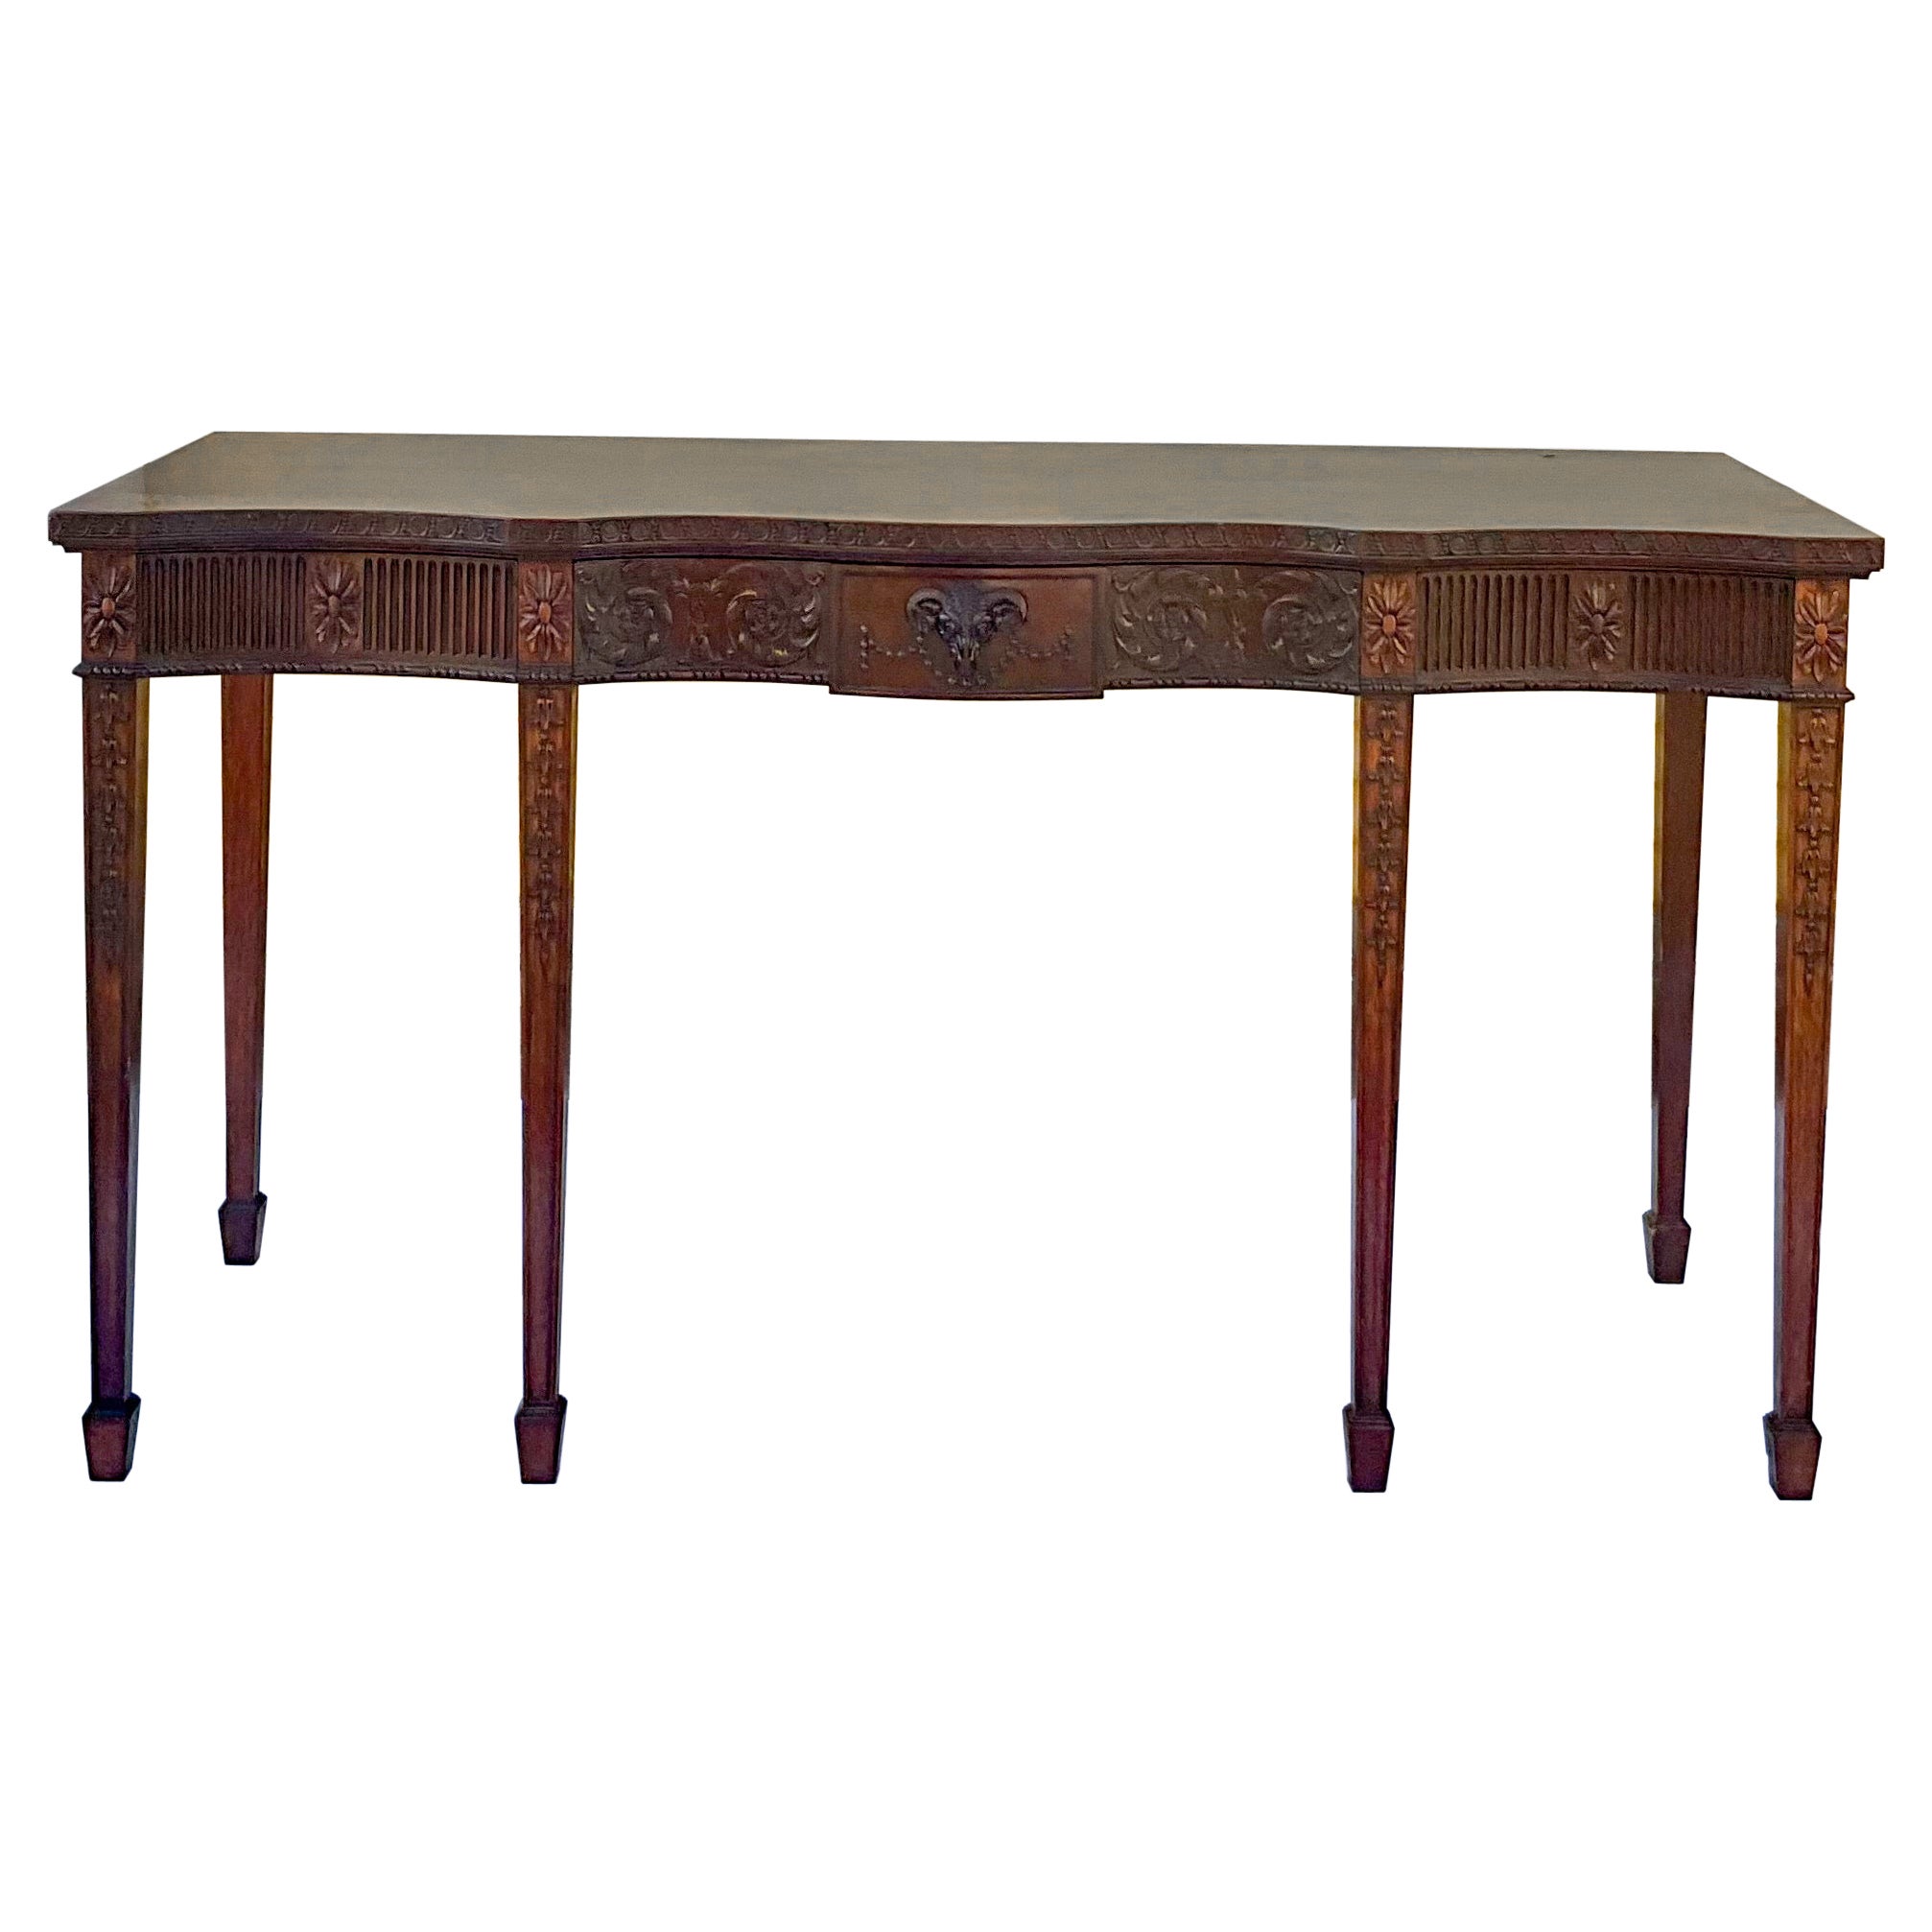 1940s Neoclassical Style Carved Mahogany Huntboard / Console Table / Server For Sale